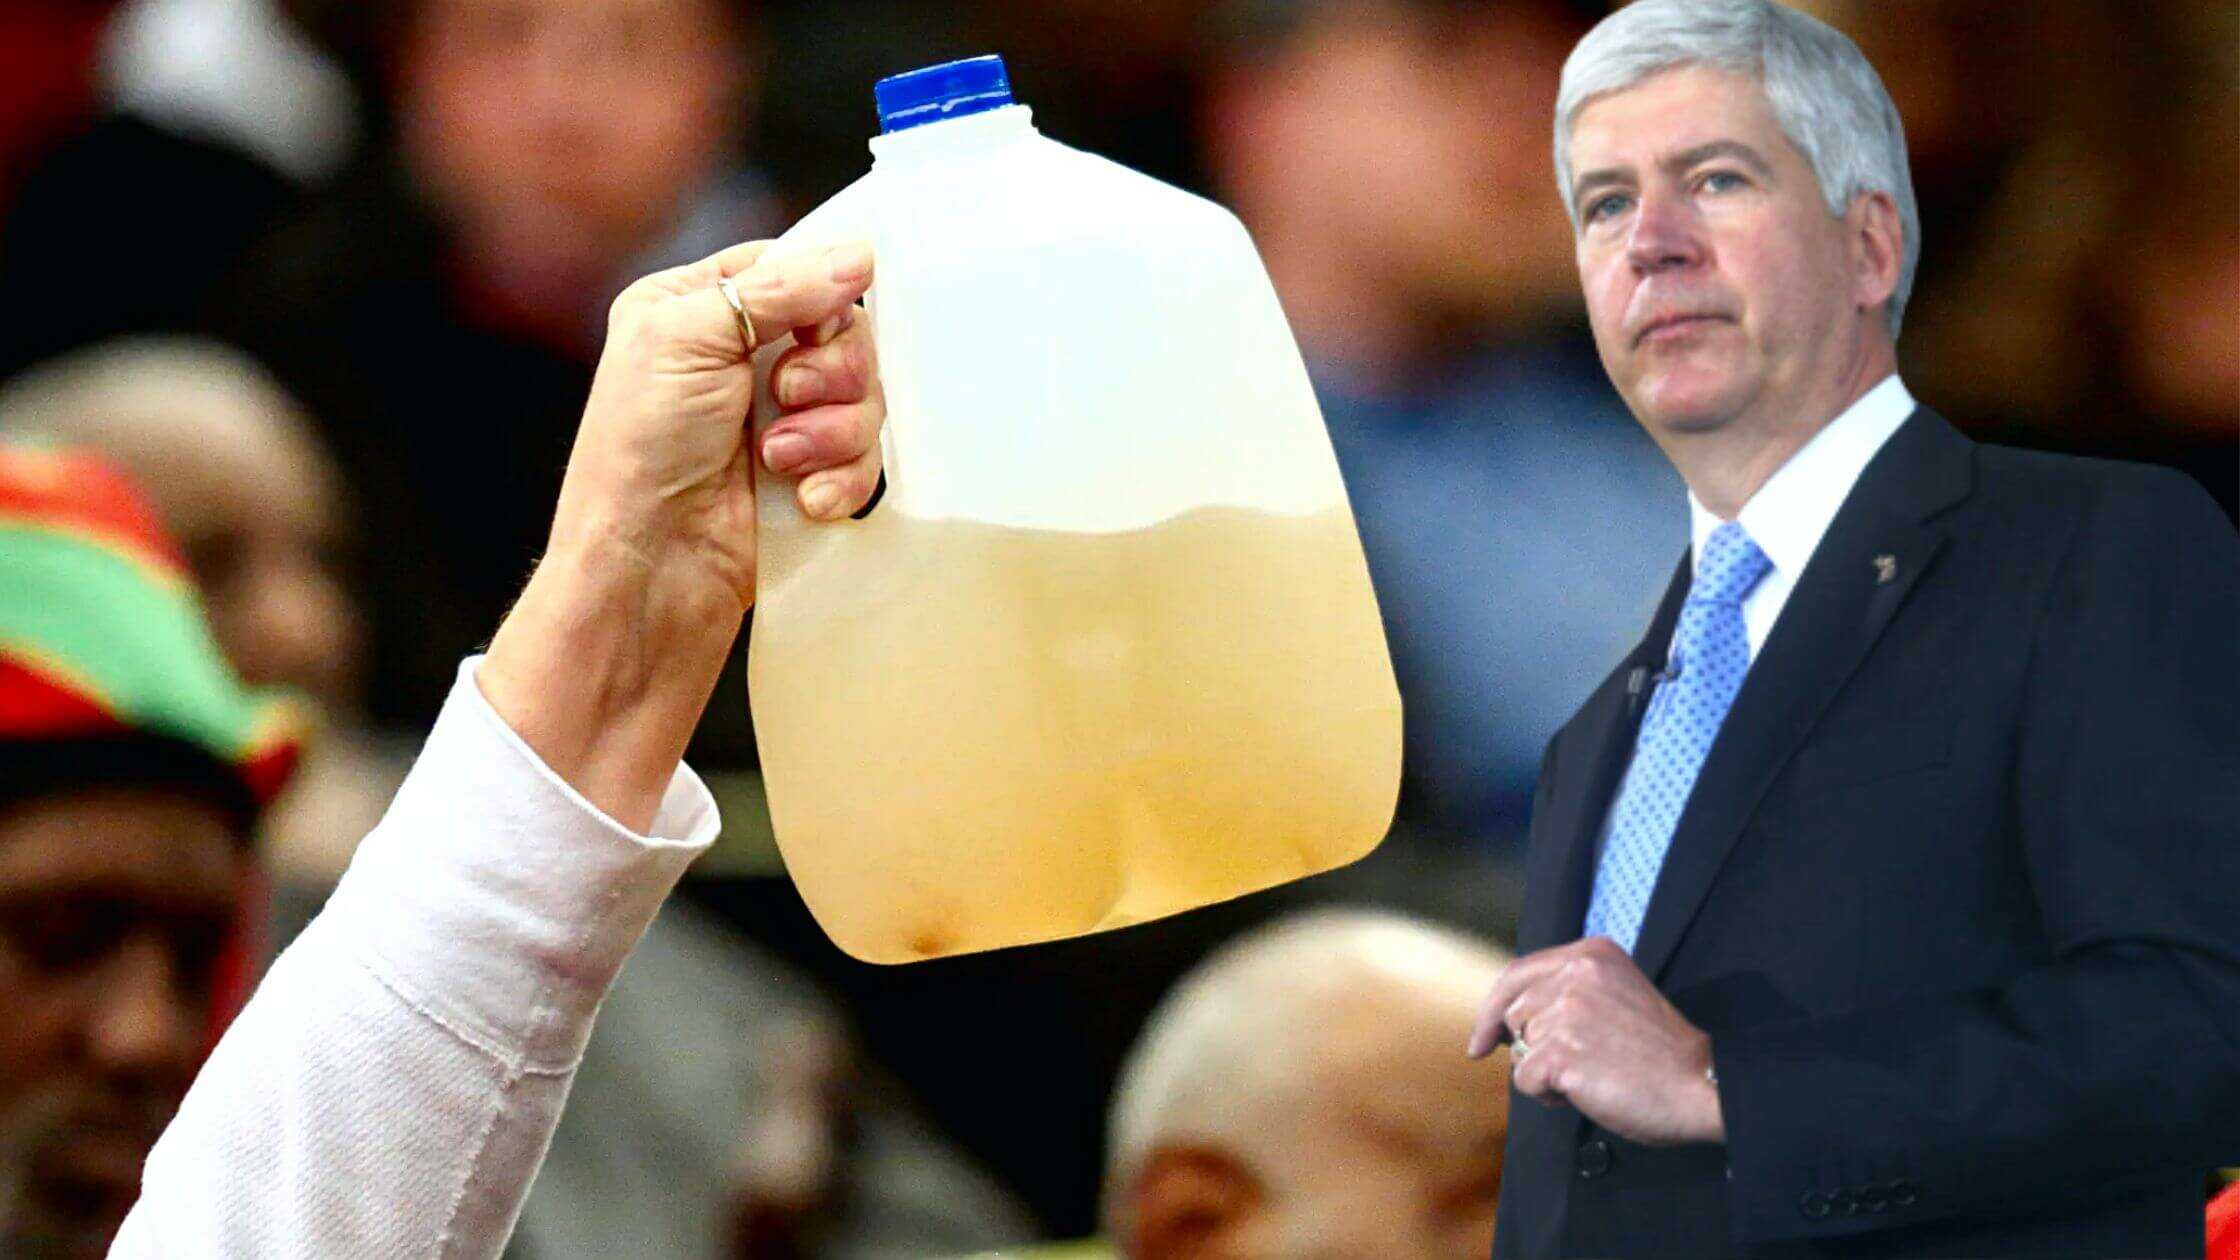 Flint Water Crisis: The Judgment Exonerates The Former Governor Of Michigan From Any Prosecution